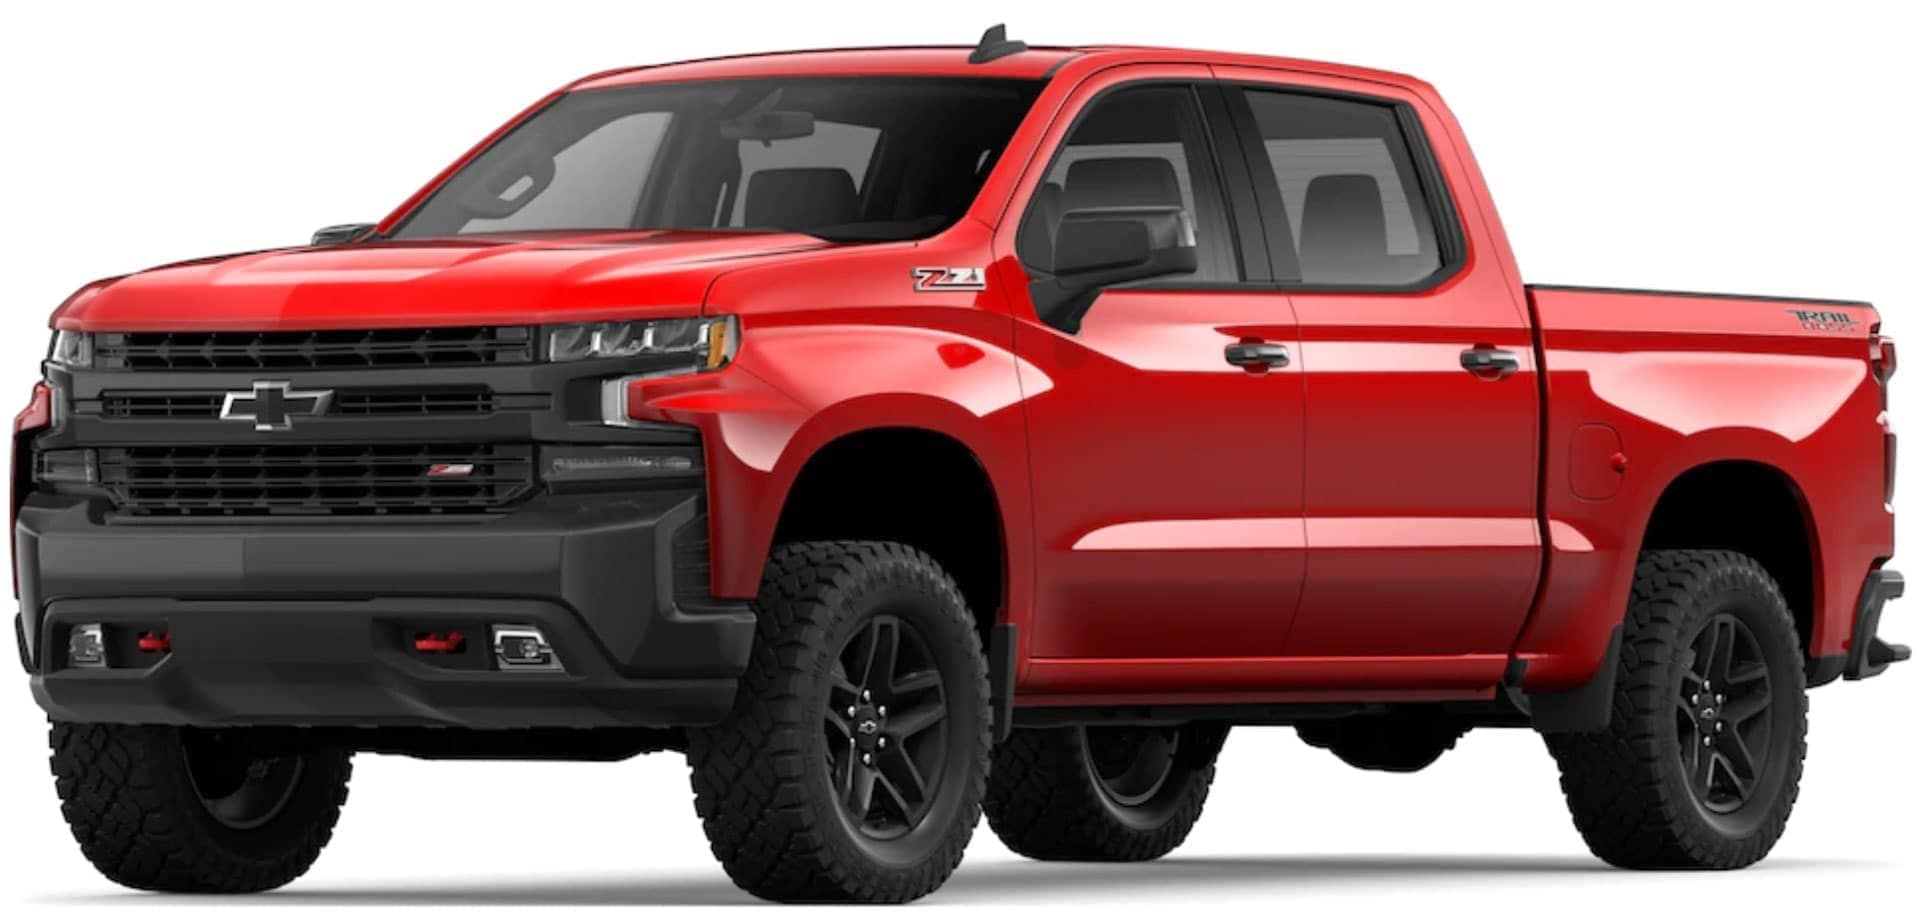 2020 Chevy Silverado 1500 Trims and Packages